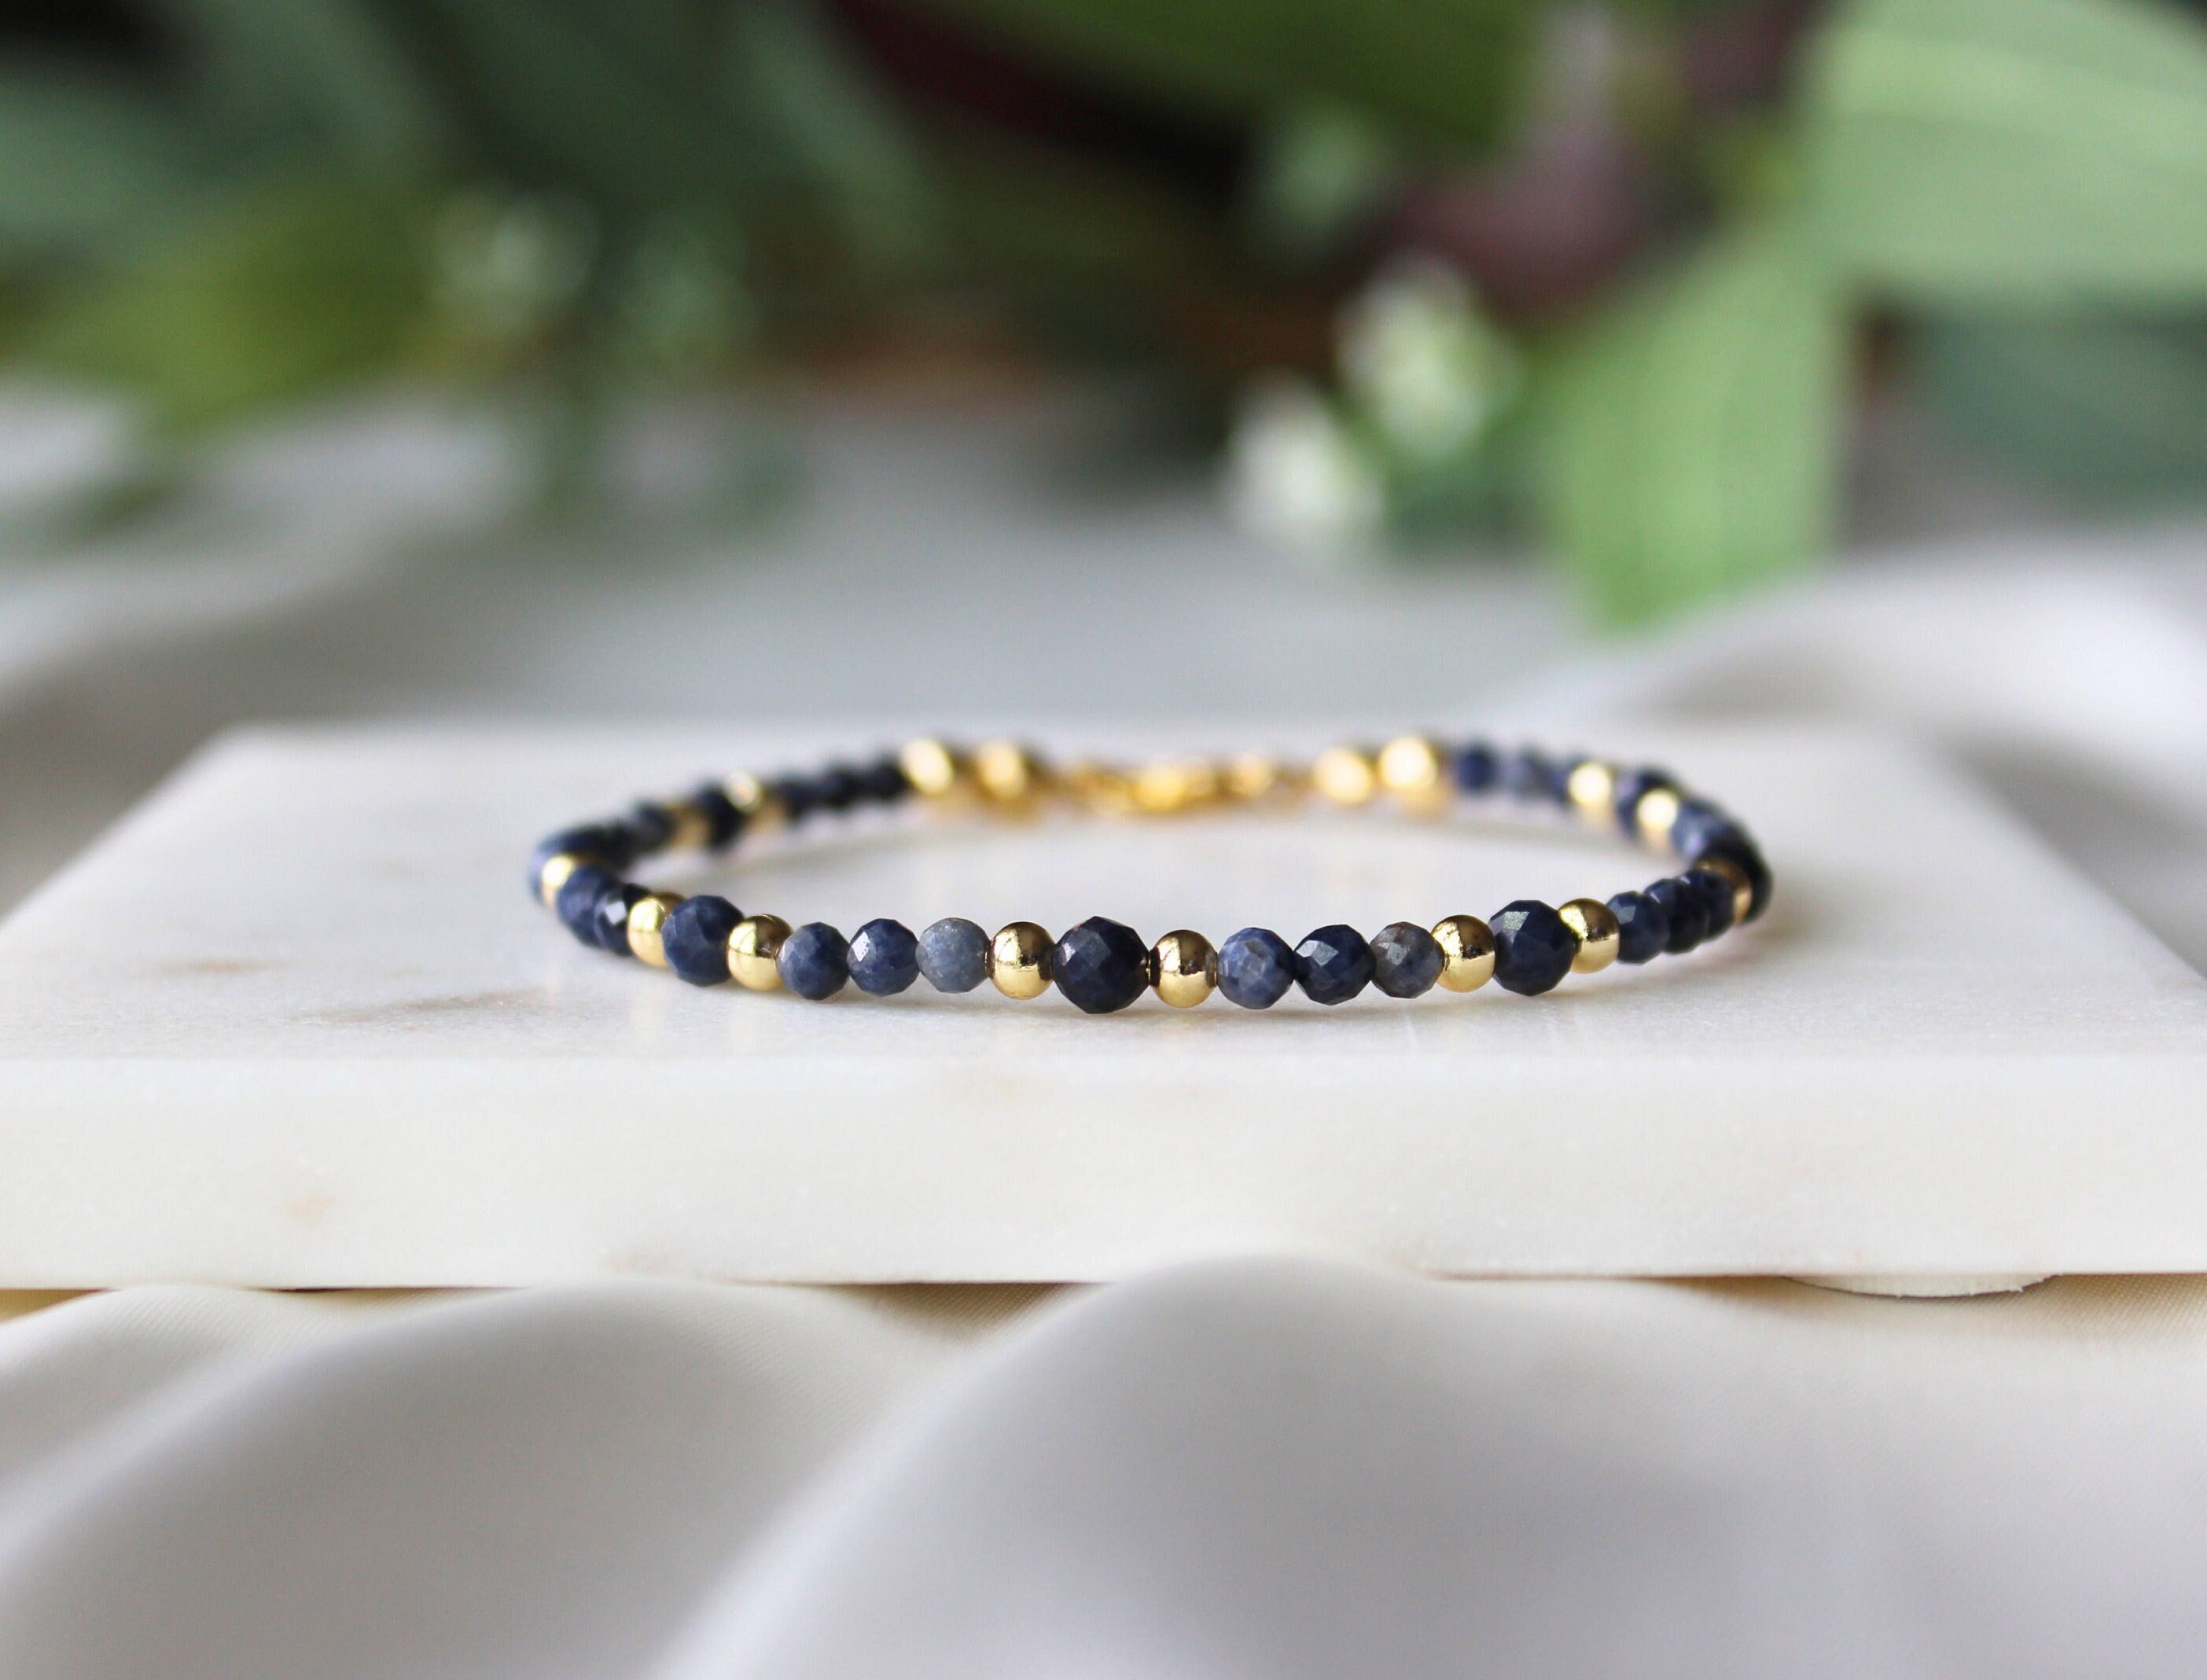 Oval Cut Blue Sapphire Bracelet, Solid Gold Diamond Bracelet, Unique Sapphire  Bracelet, Mothers Day Gifts - Etsy